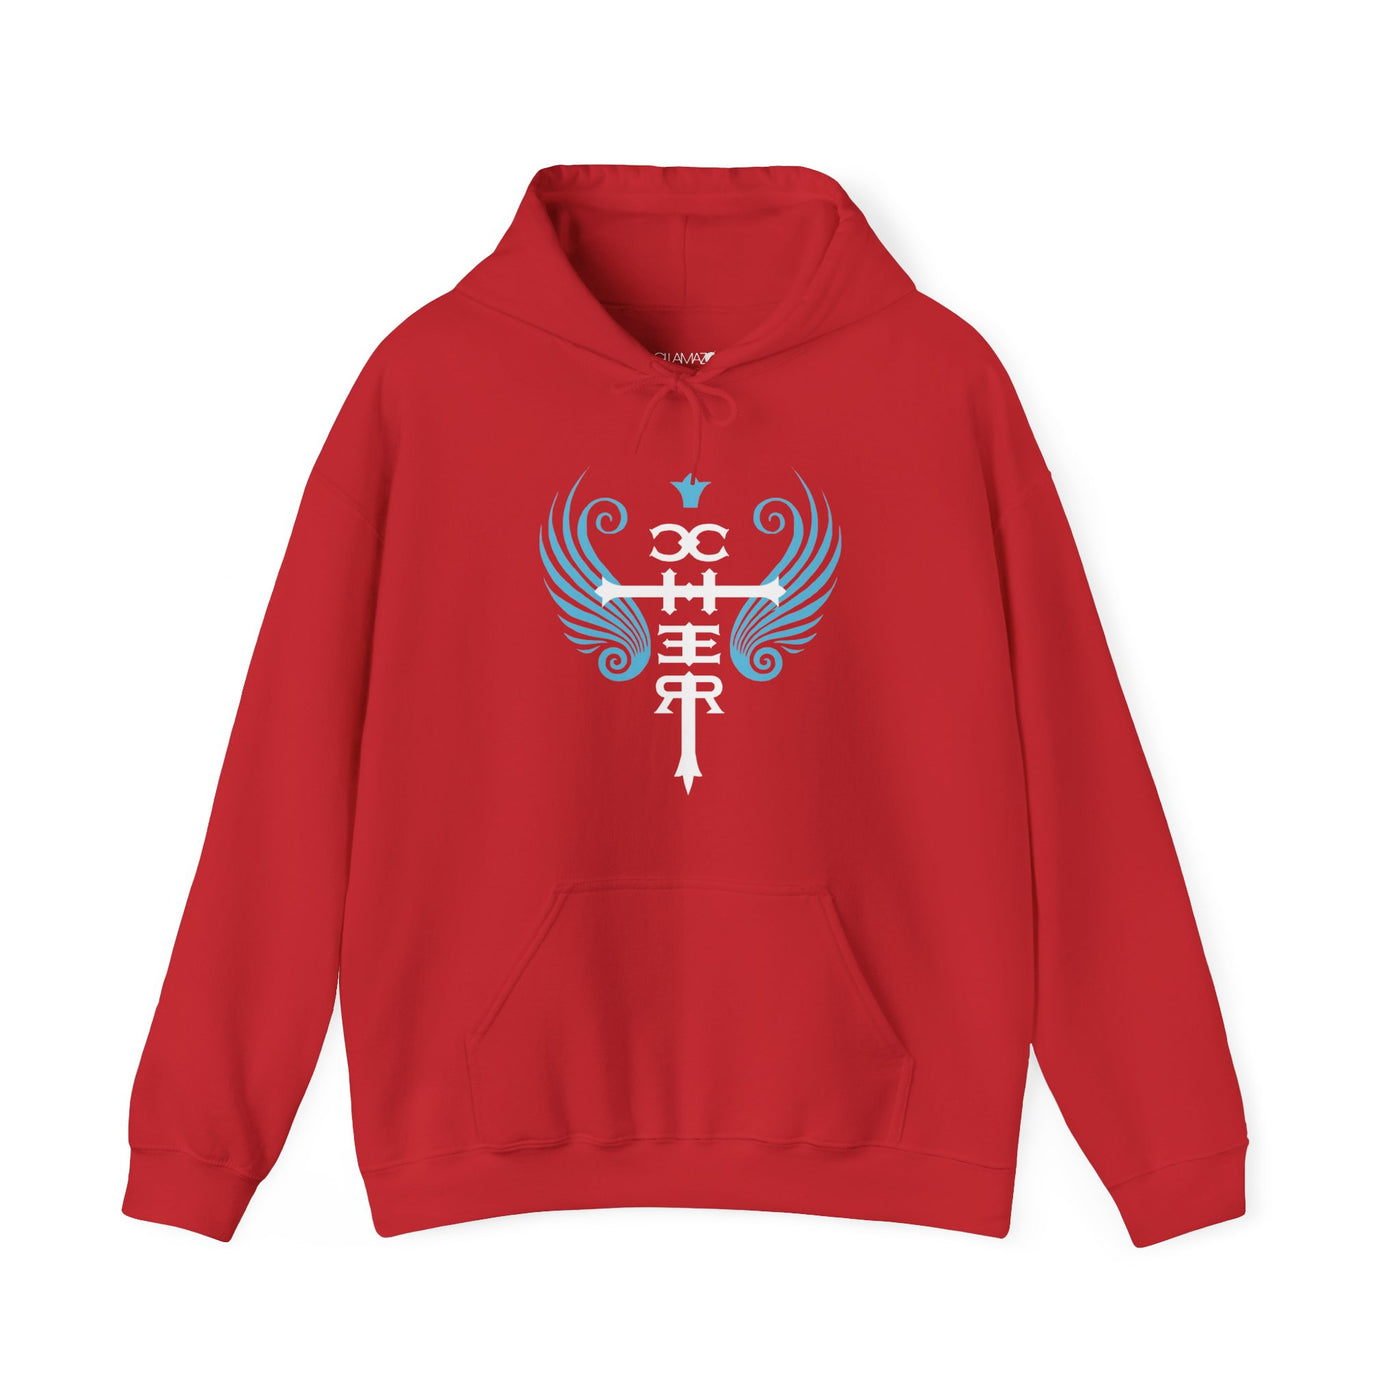 Cher Fan Club Premium Hoodie by Gllamazon. Color: Red.